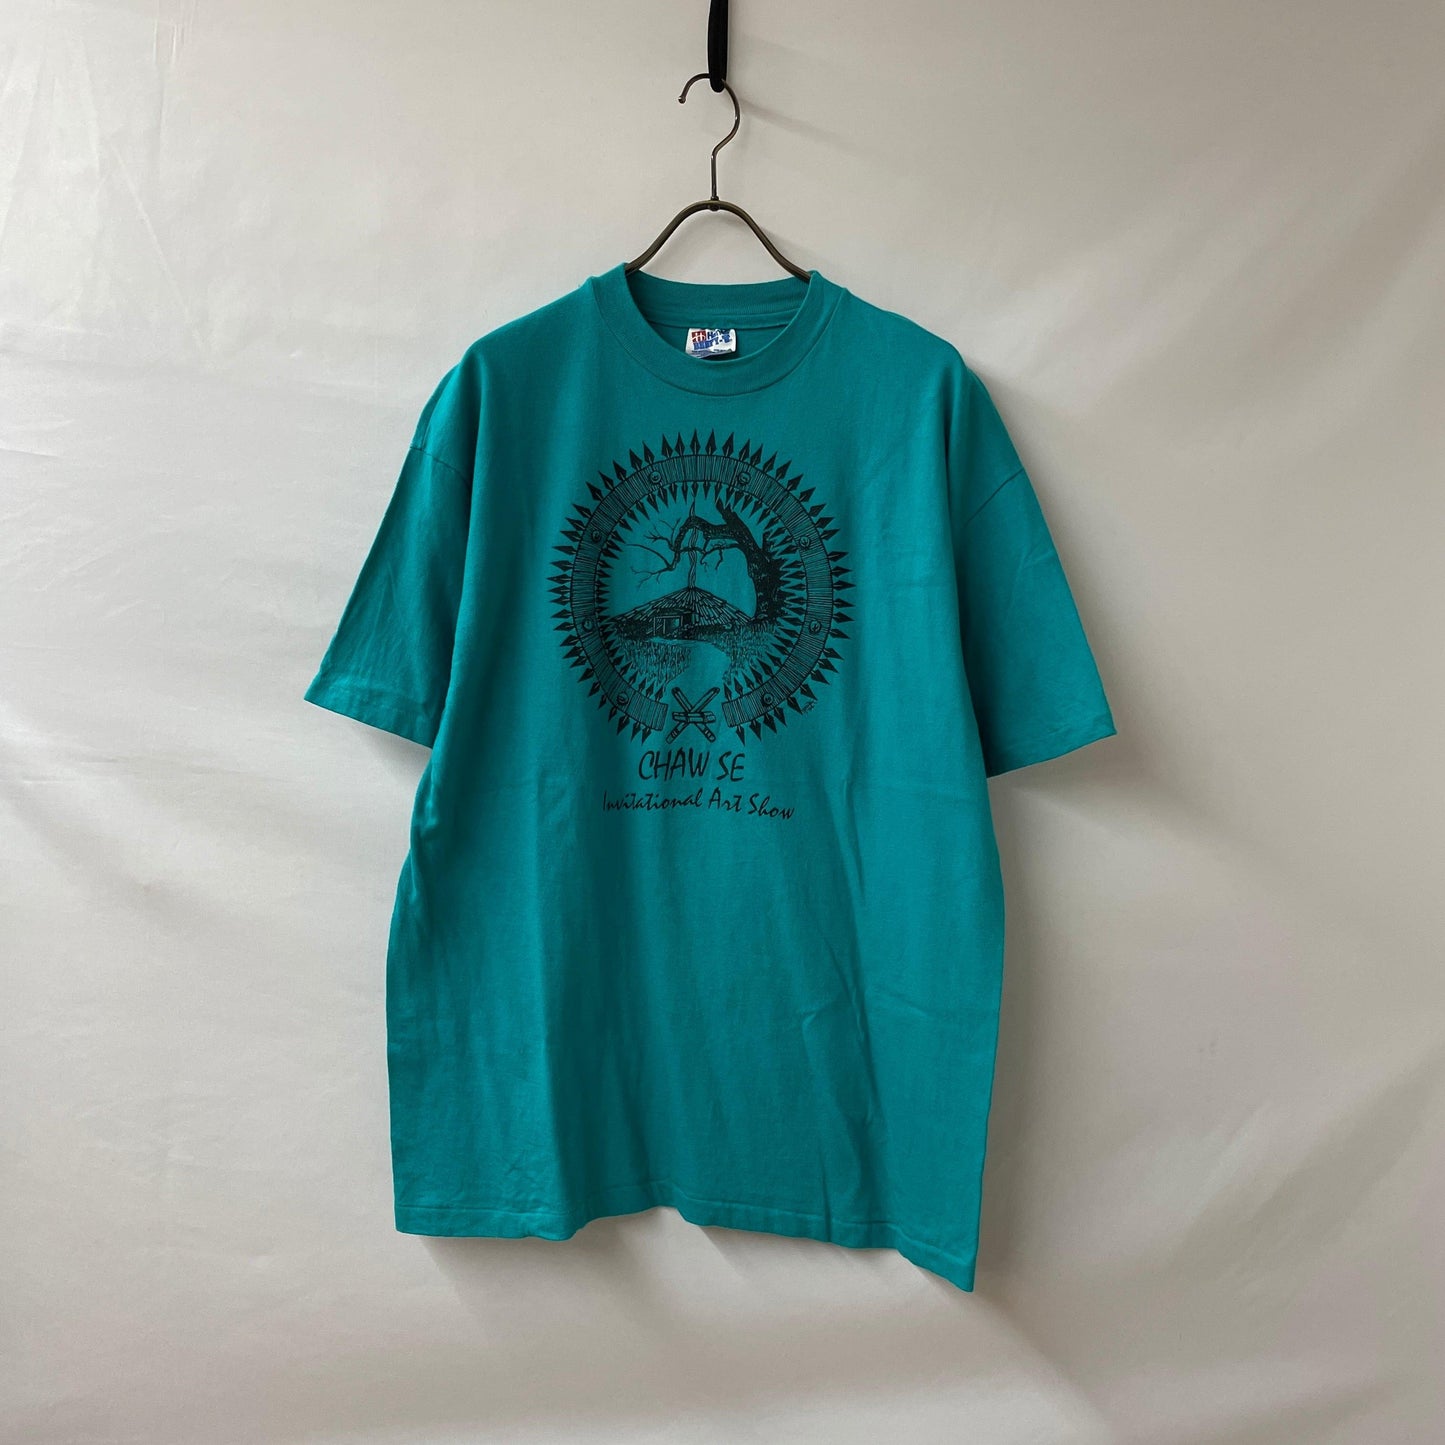 90s vintage Tee Hanes シングルステッチ